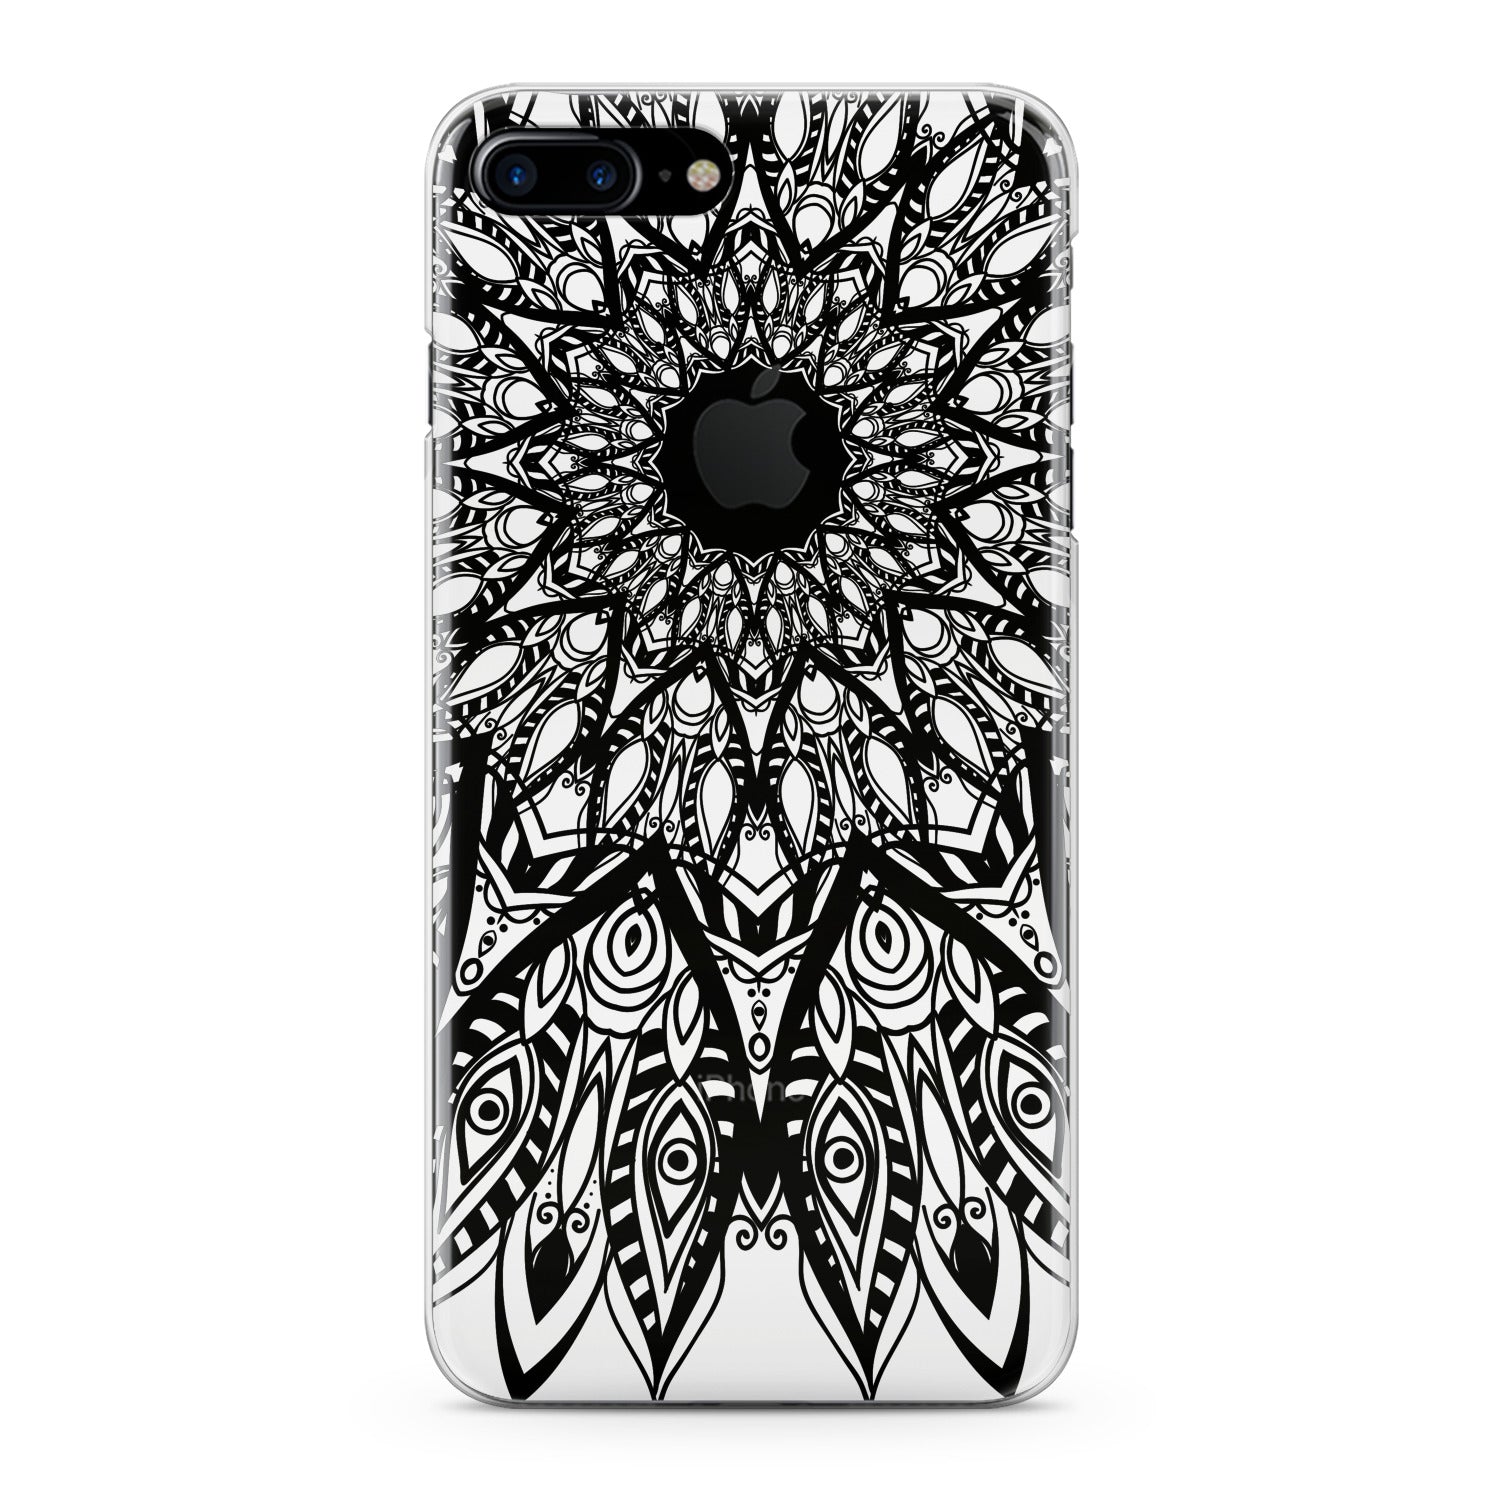 Lex Altern White Mandala Phone Case for your iPhone & Android phone.